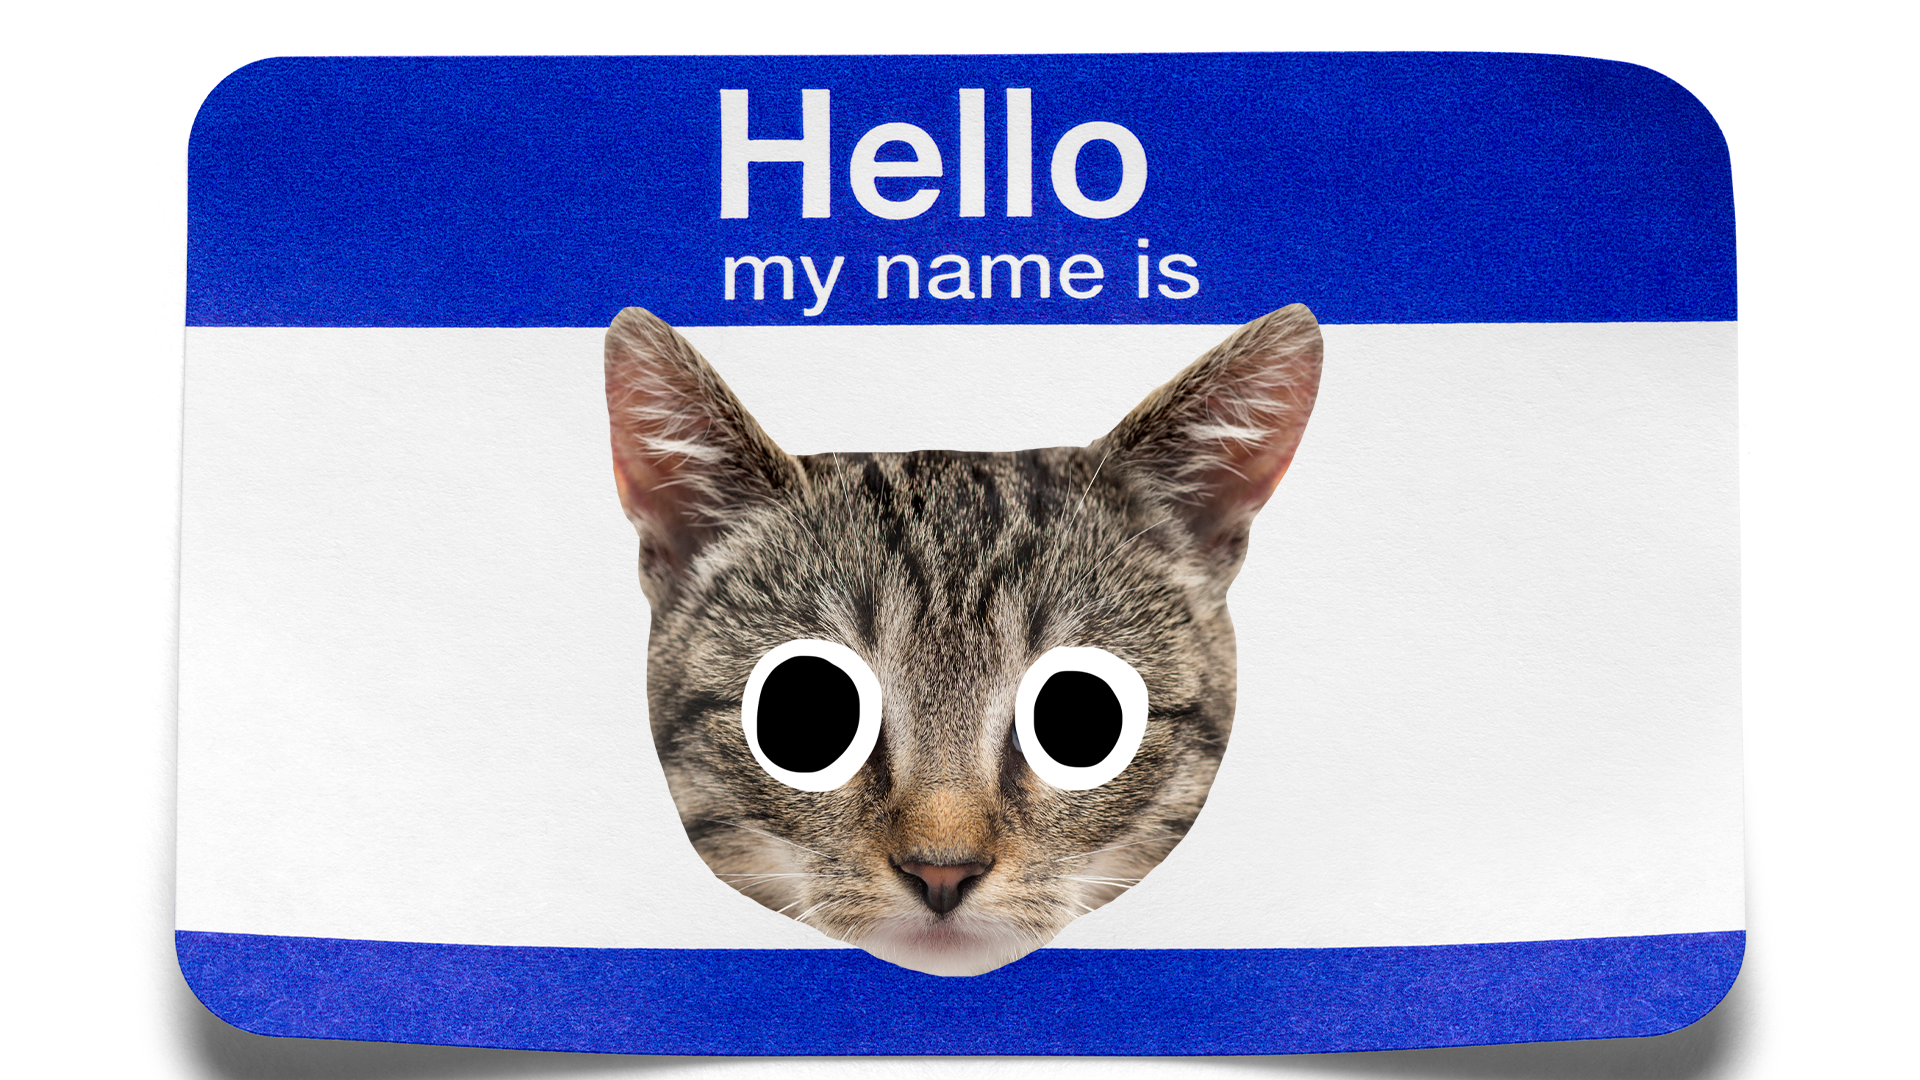 Name badge with cat face